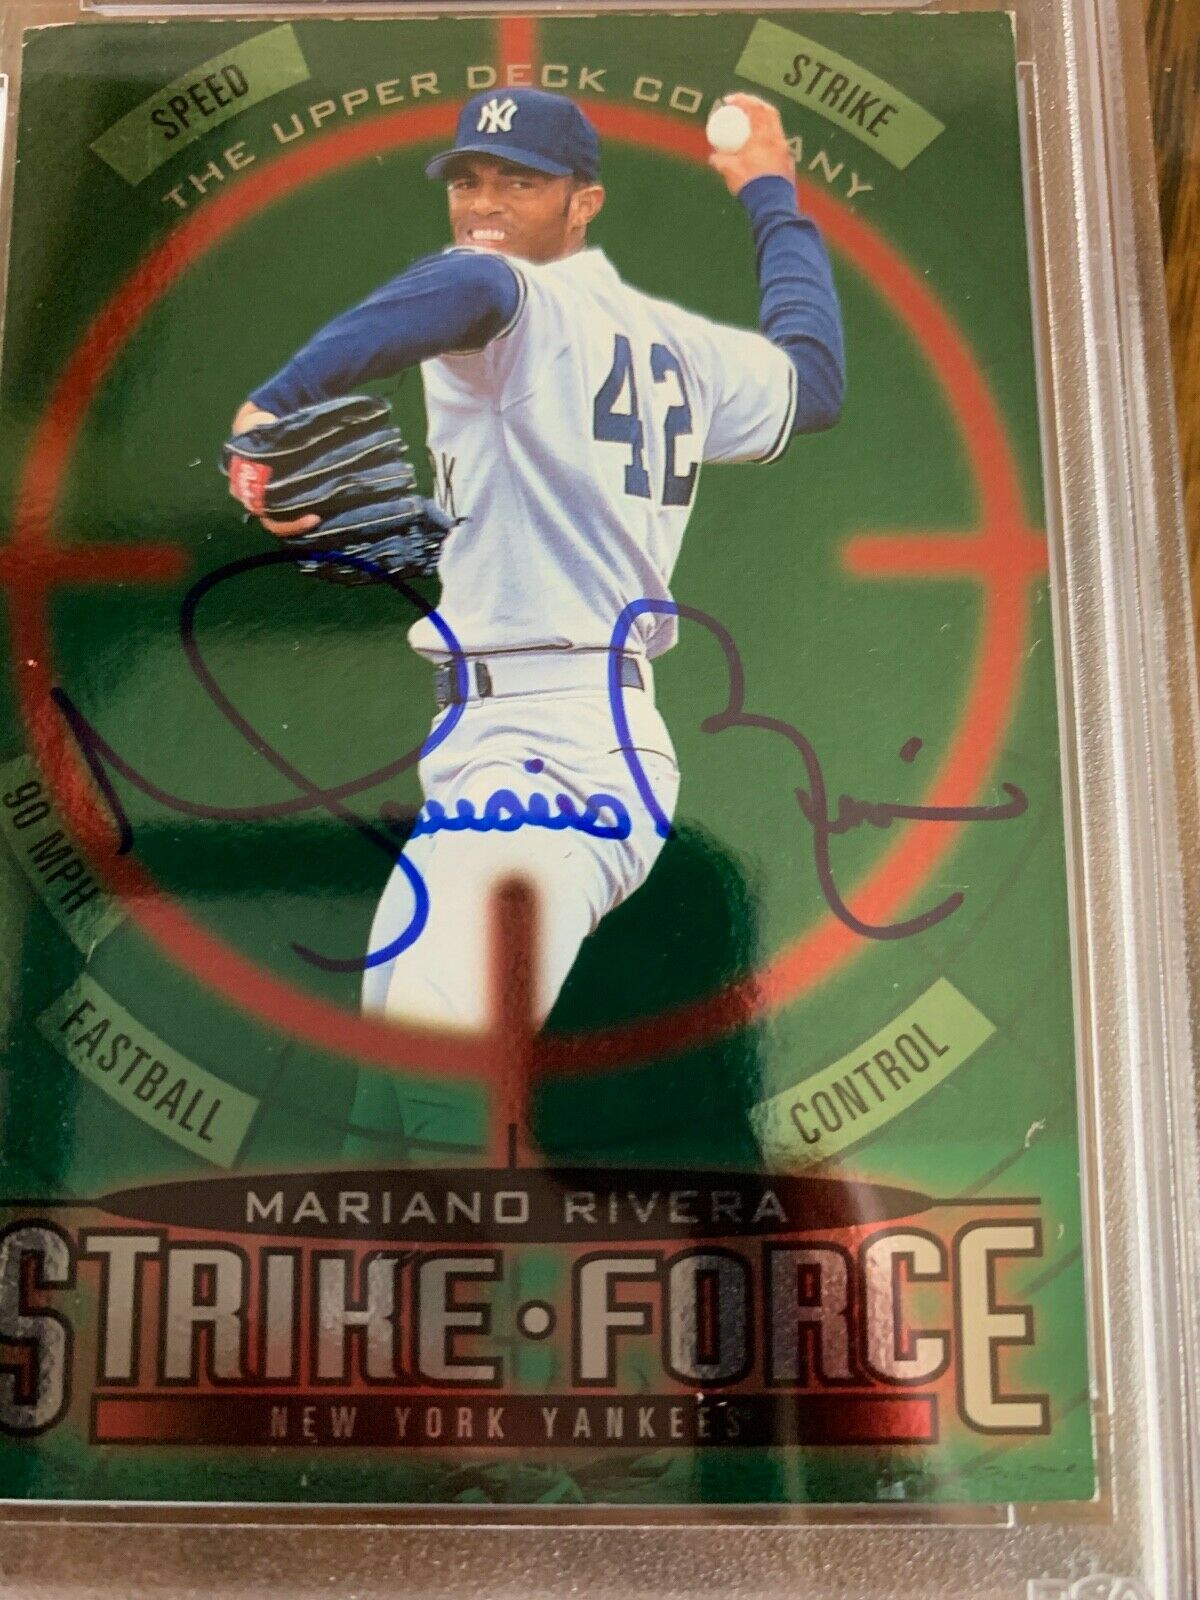 1997 Upper Deck Strike Force Mariano Rivera Autographed Card PSA